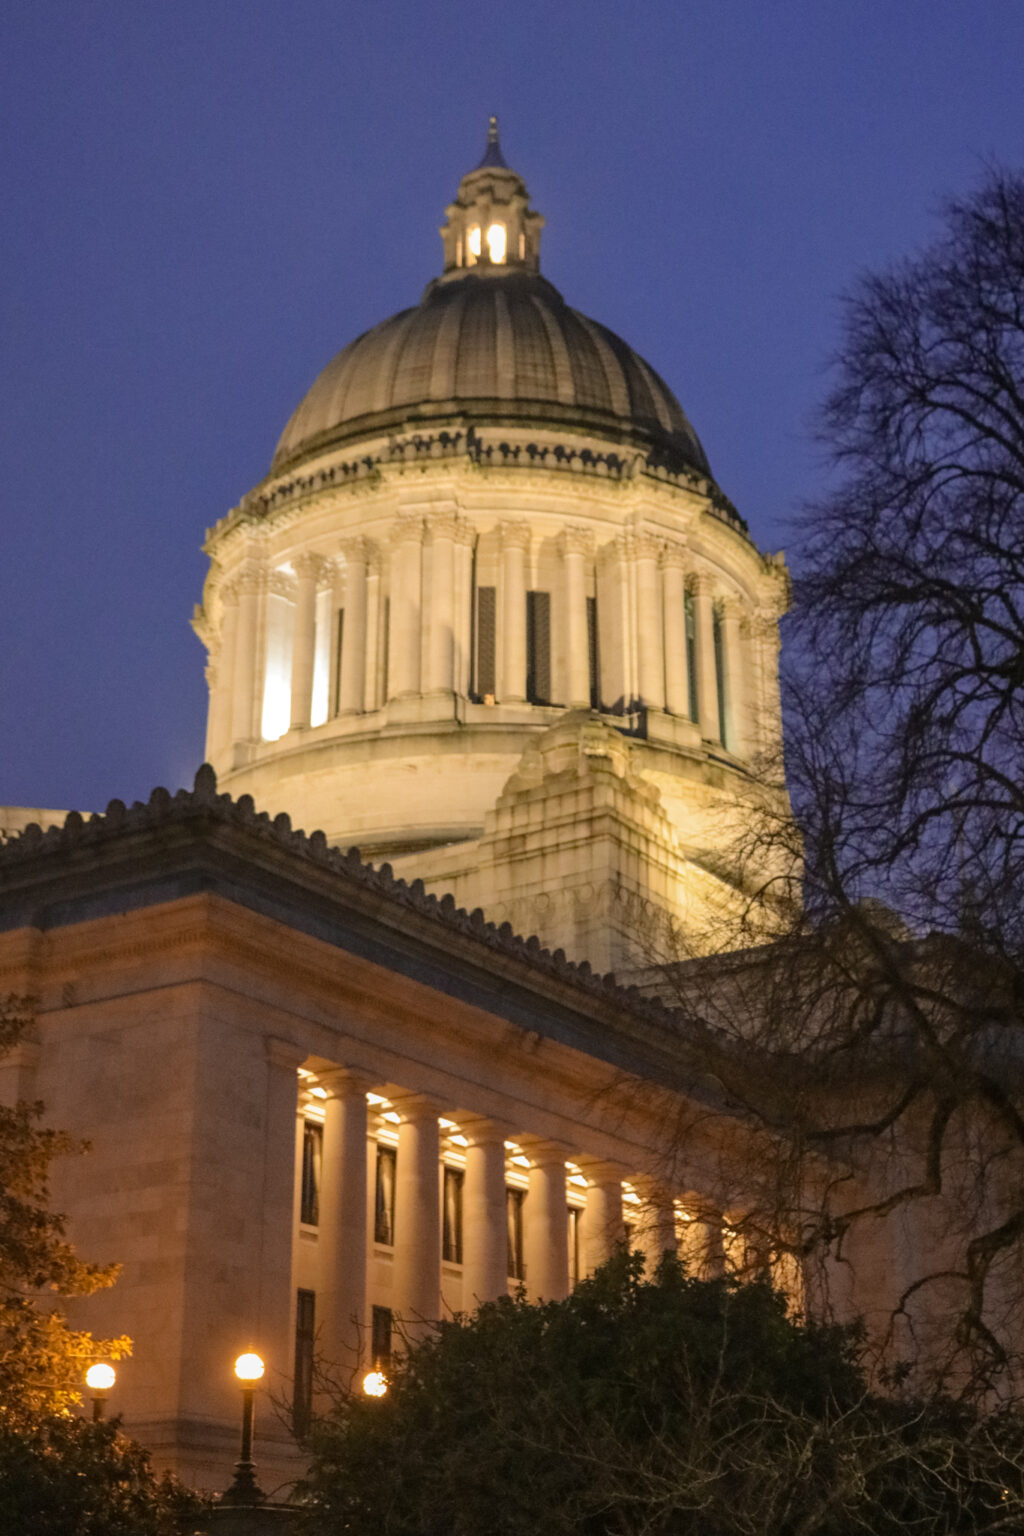 A picture of the Washington State Capitol Building at night.